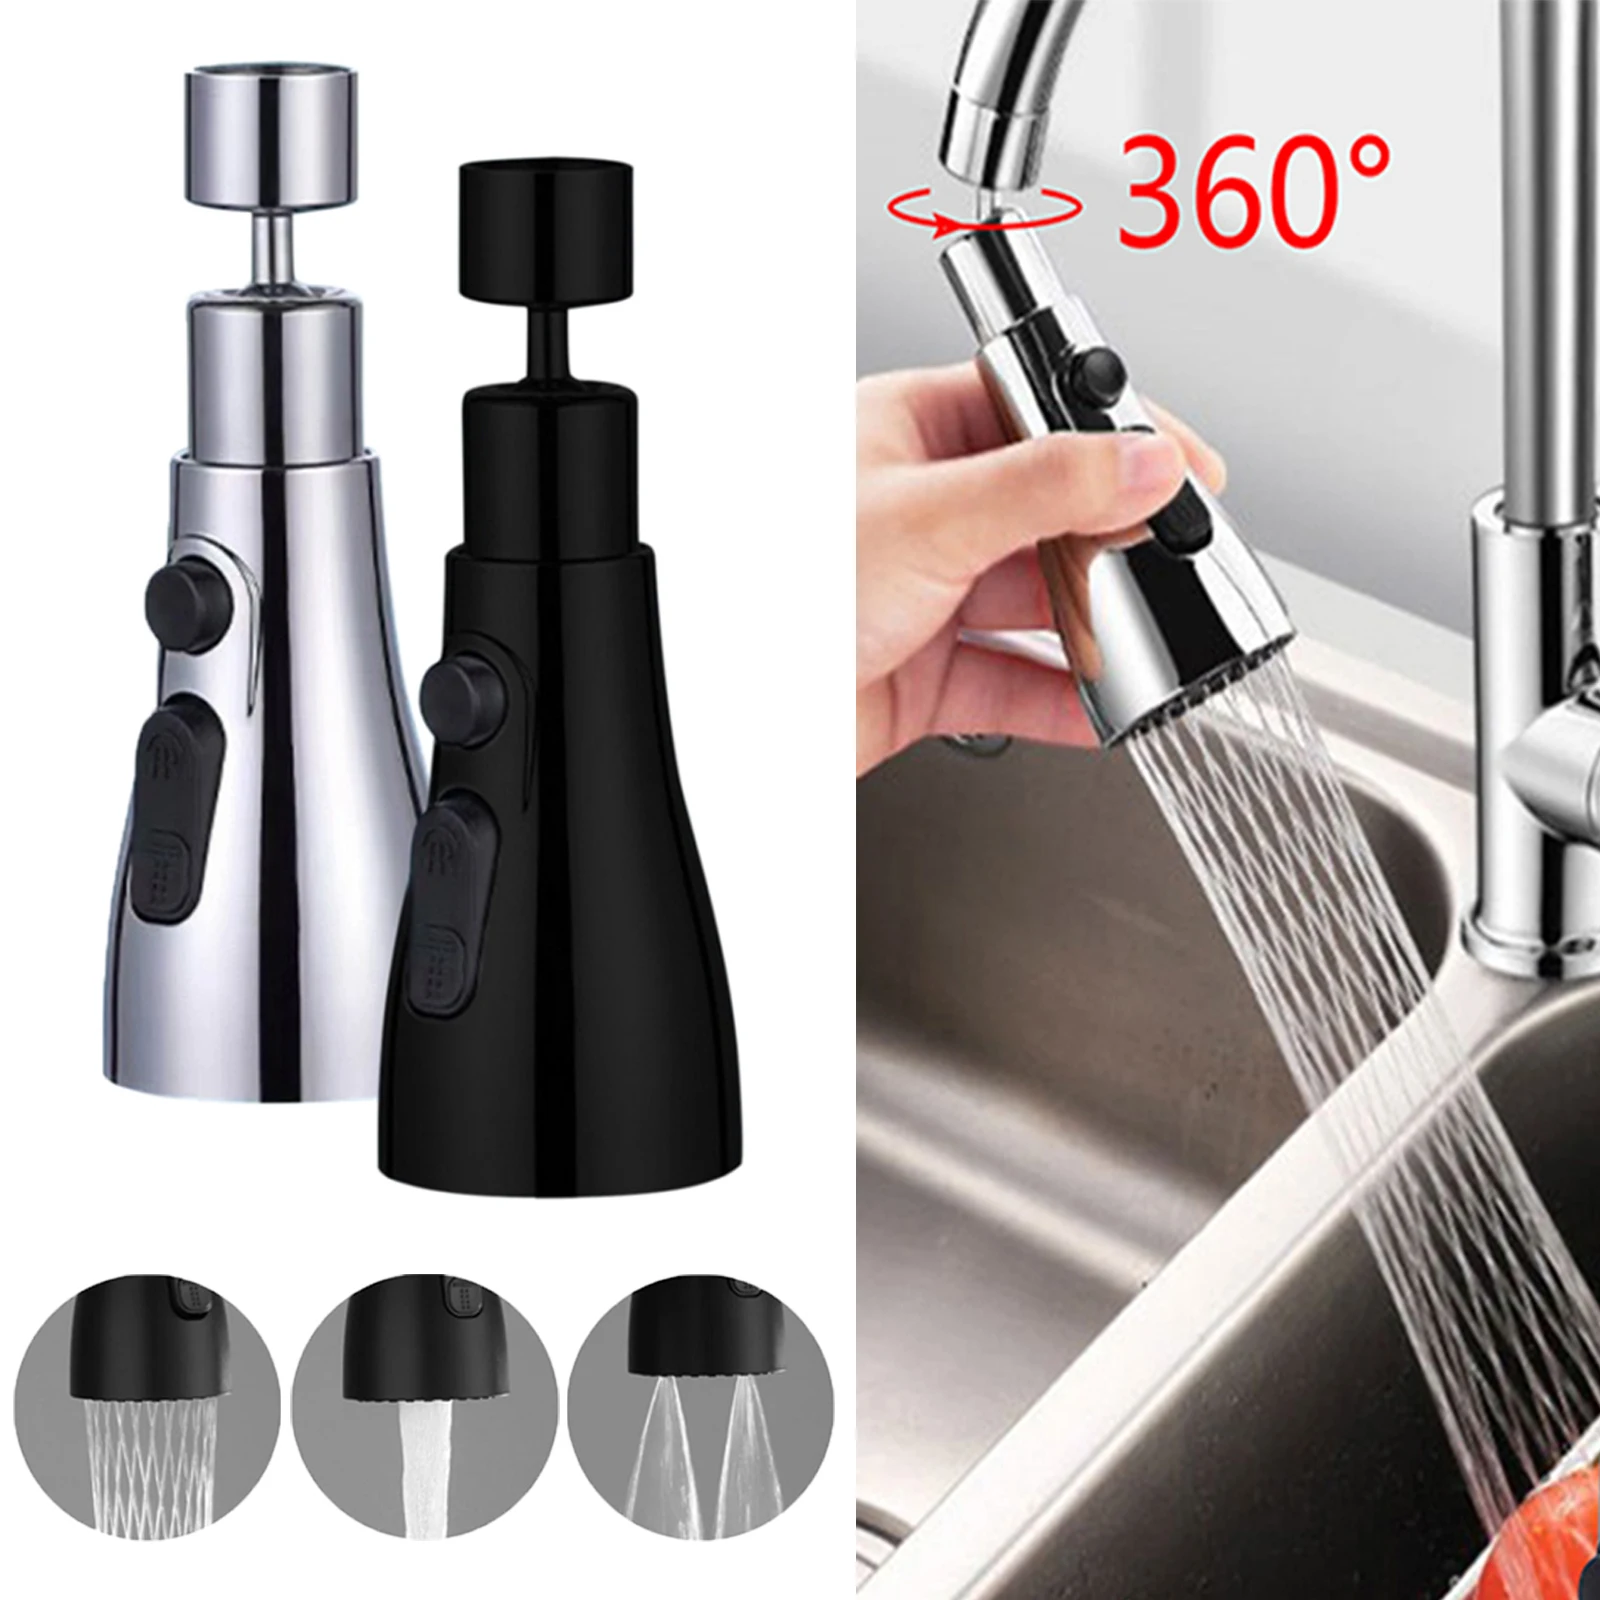 360 Rotating Faucet Extender  Universal Kitchen Tap  Strong Wash Kitchen Faucet  3 Modes Adjustable Water Tap  Kitchen Gadgets kitchen faucet universal joint anti splash head mouth wash dish basin can rotate pressurized shower